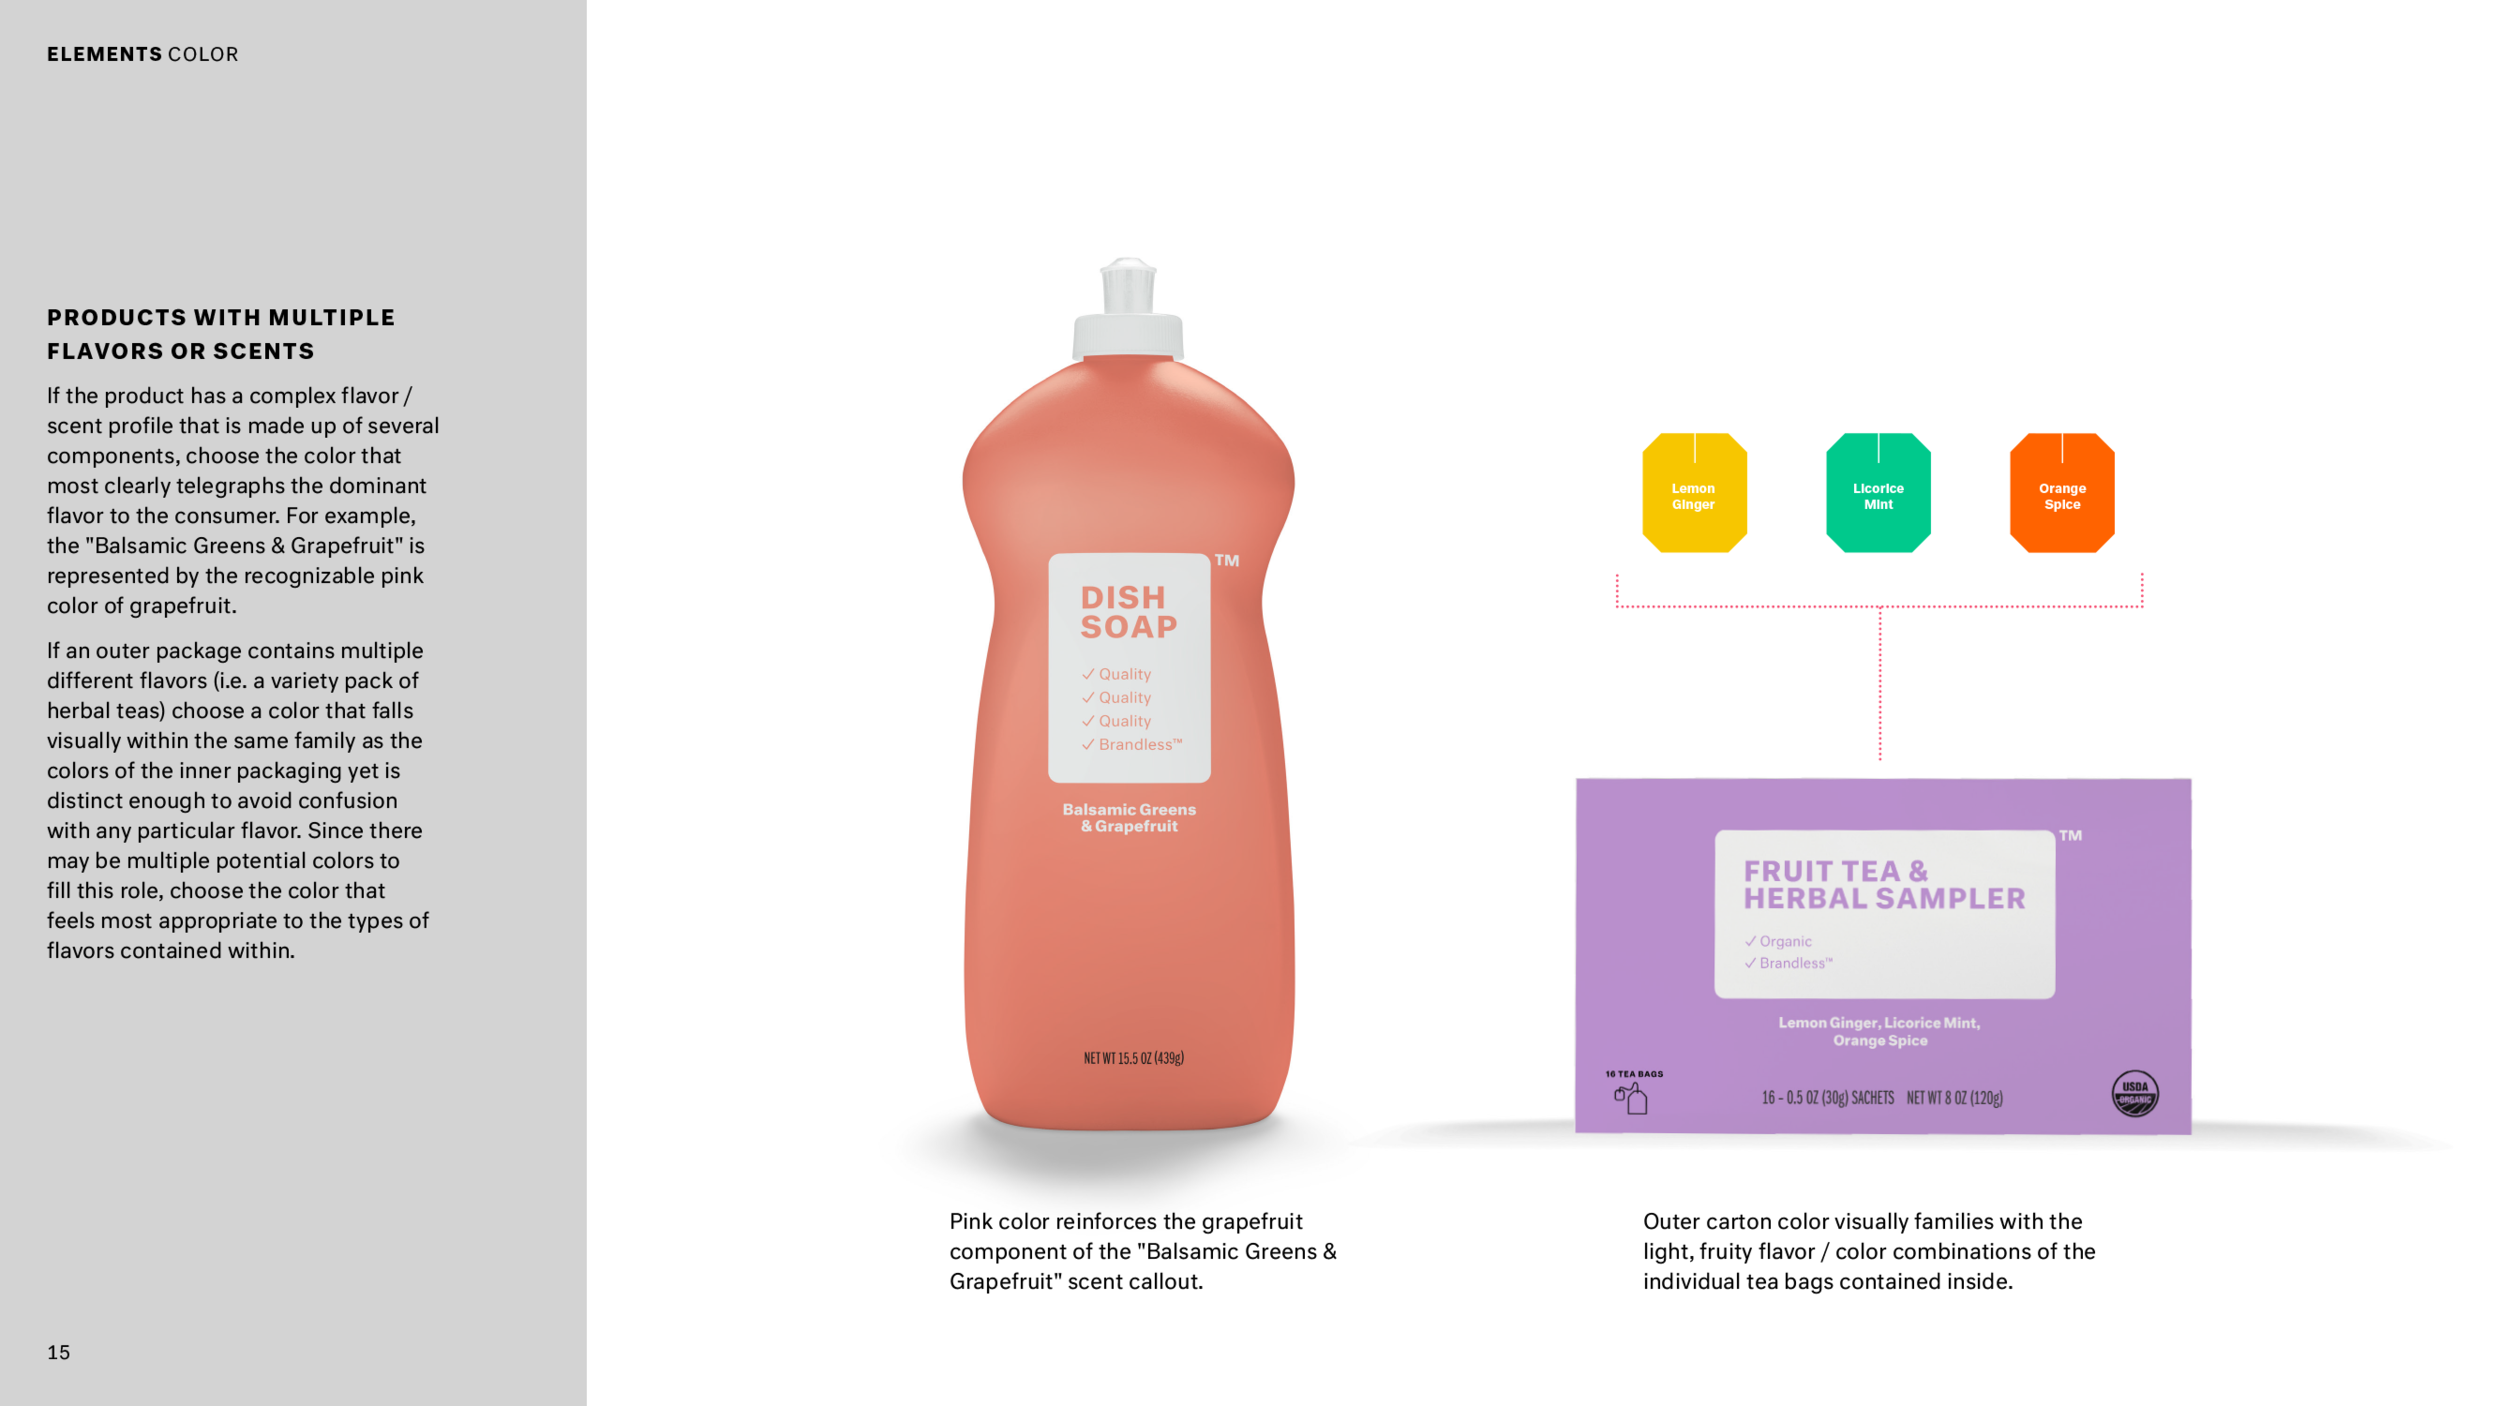 BRA001.Brandless.Packaging.Style.Guide.R1.v17-15 copy.png